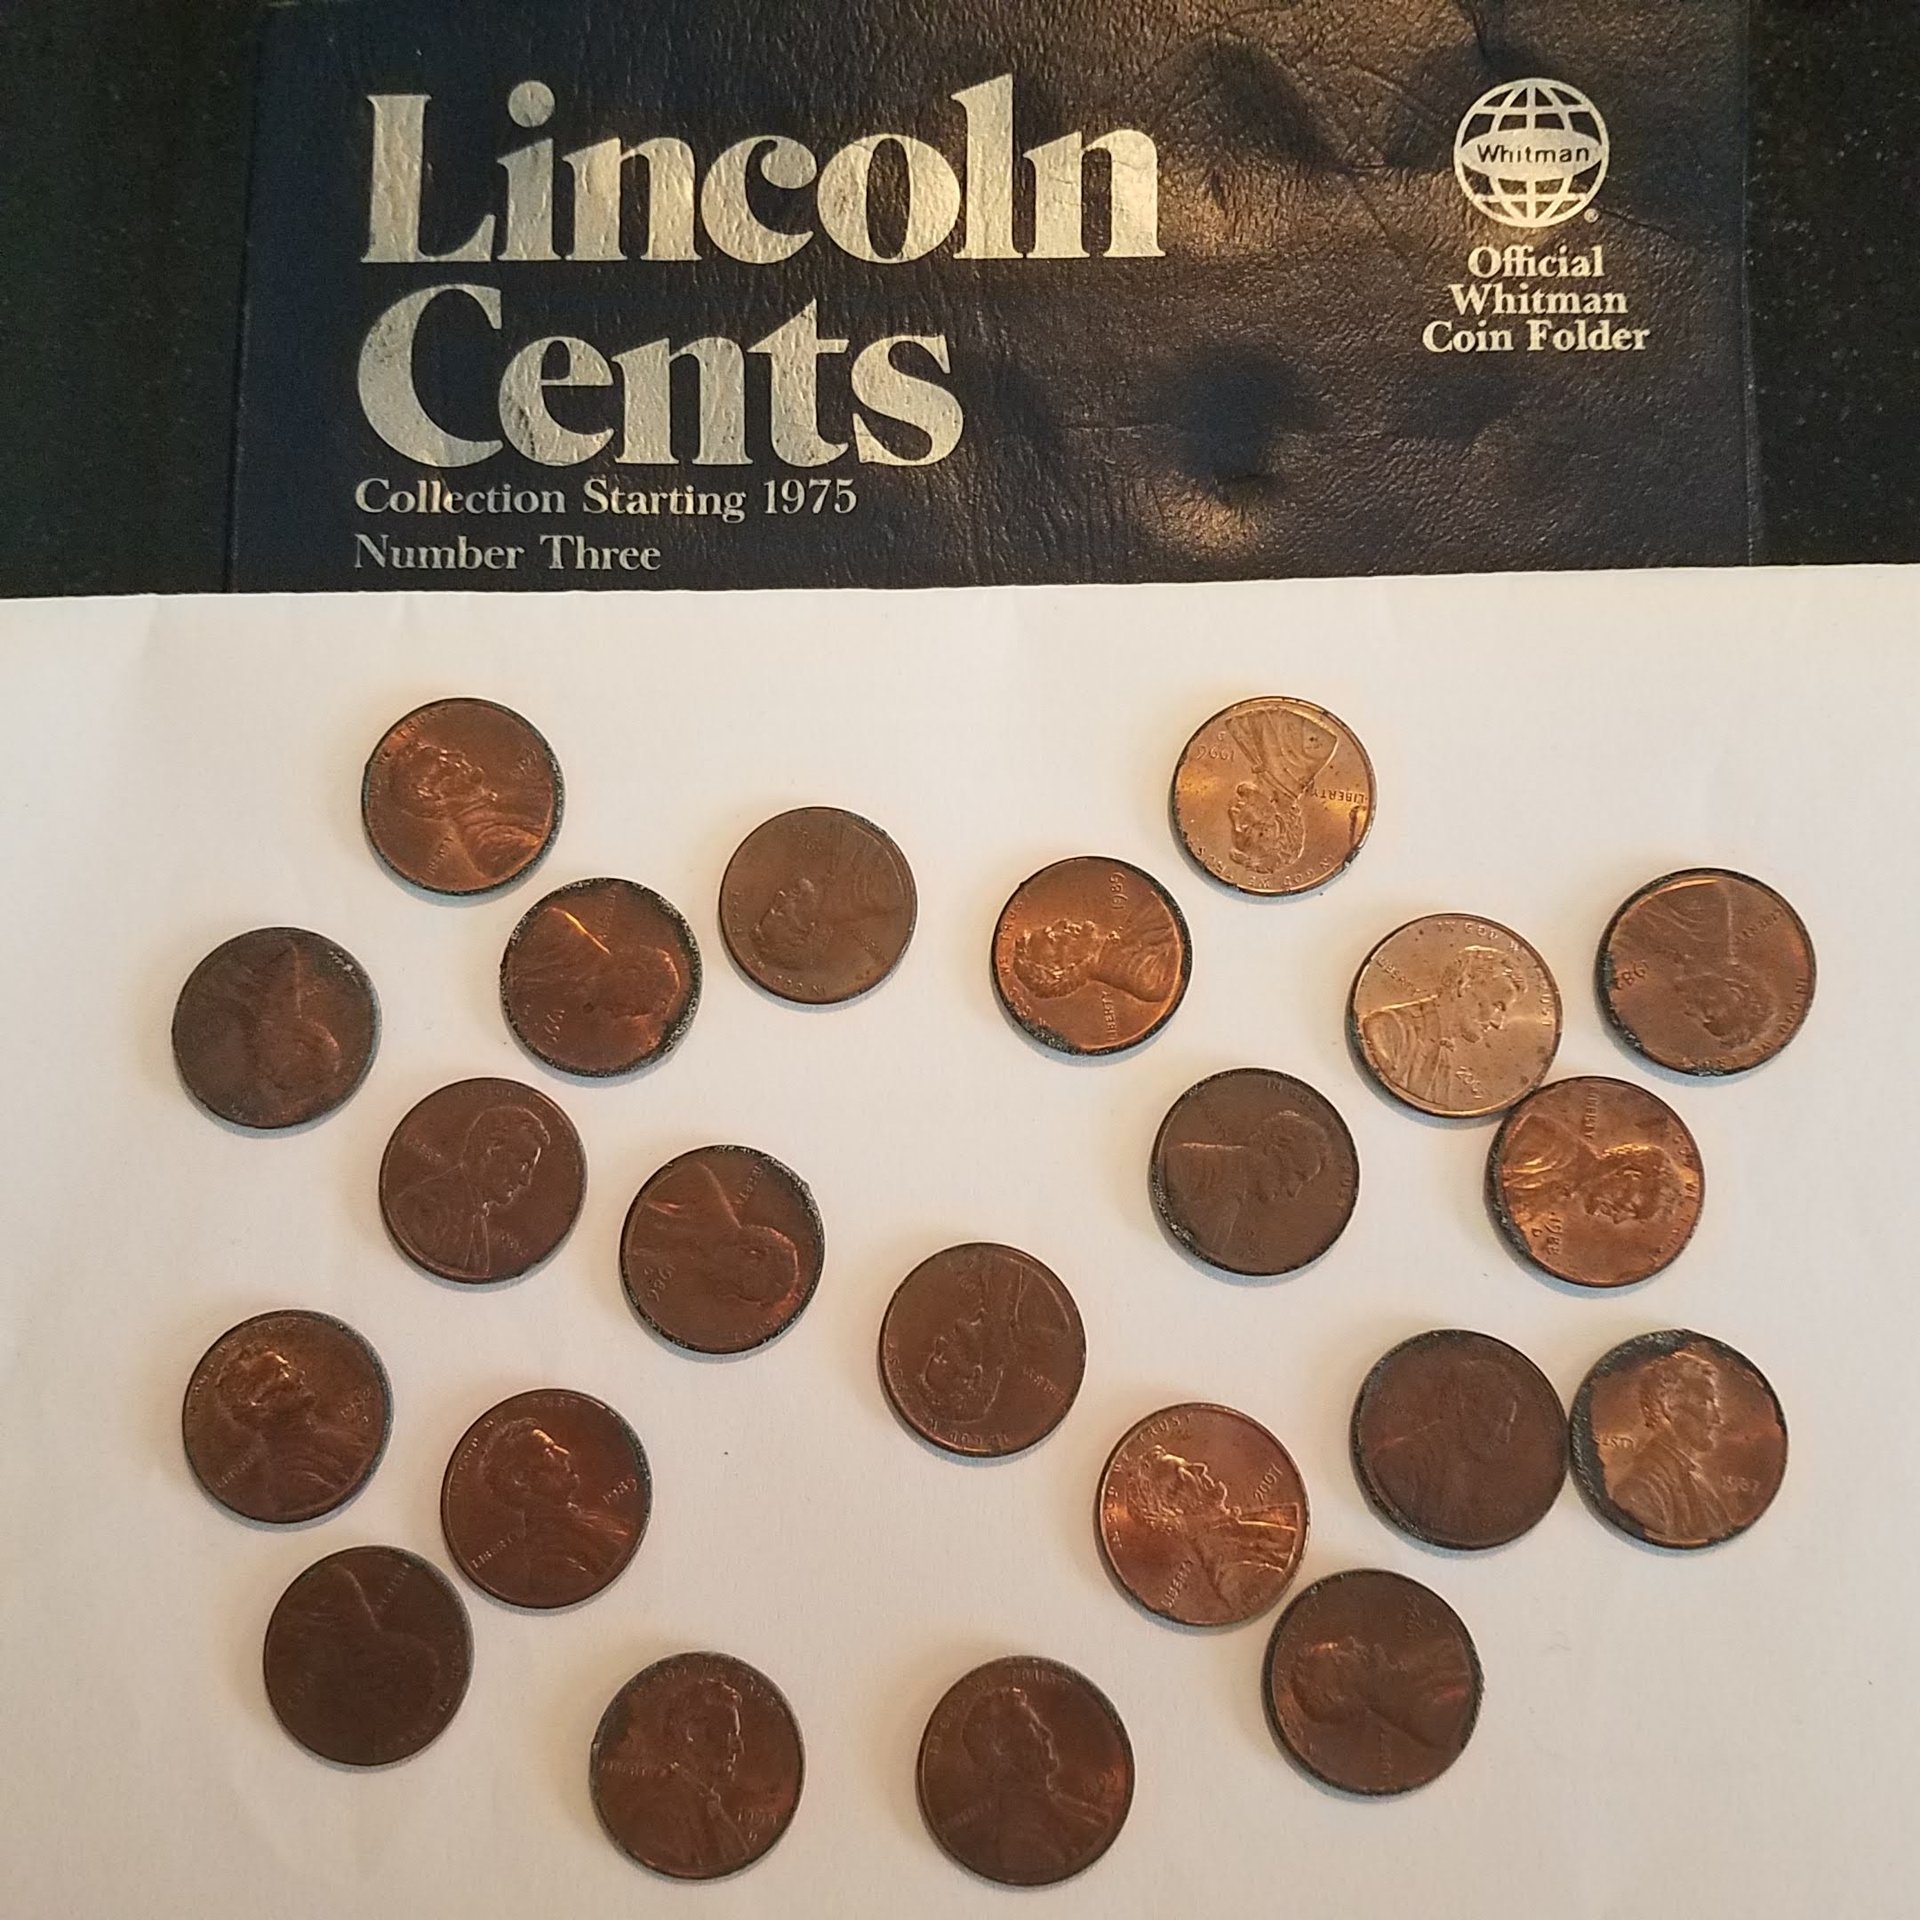 Found it in a Whitman coin book. Wish it wasn't damaged. : r/coins